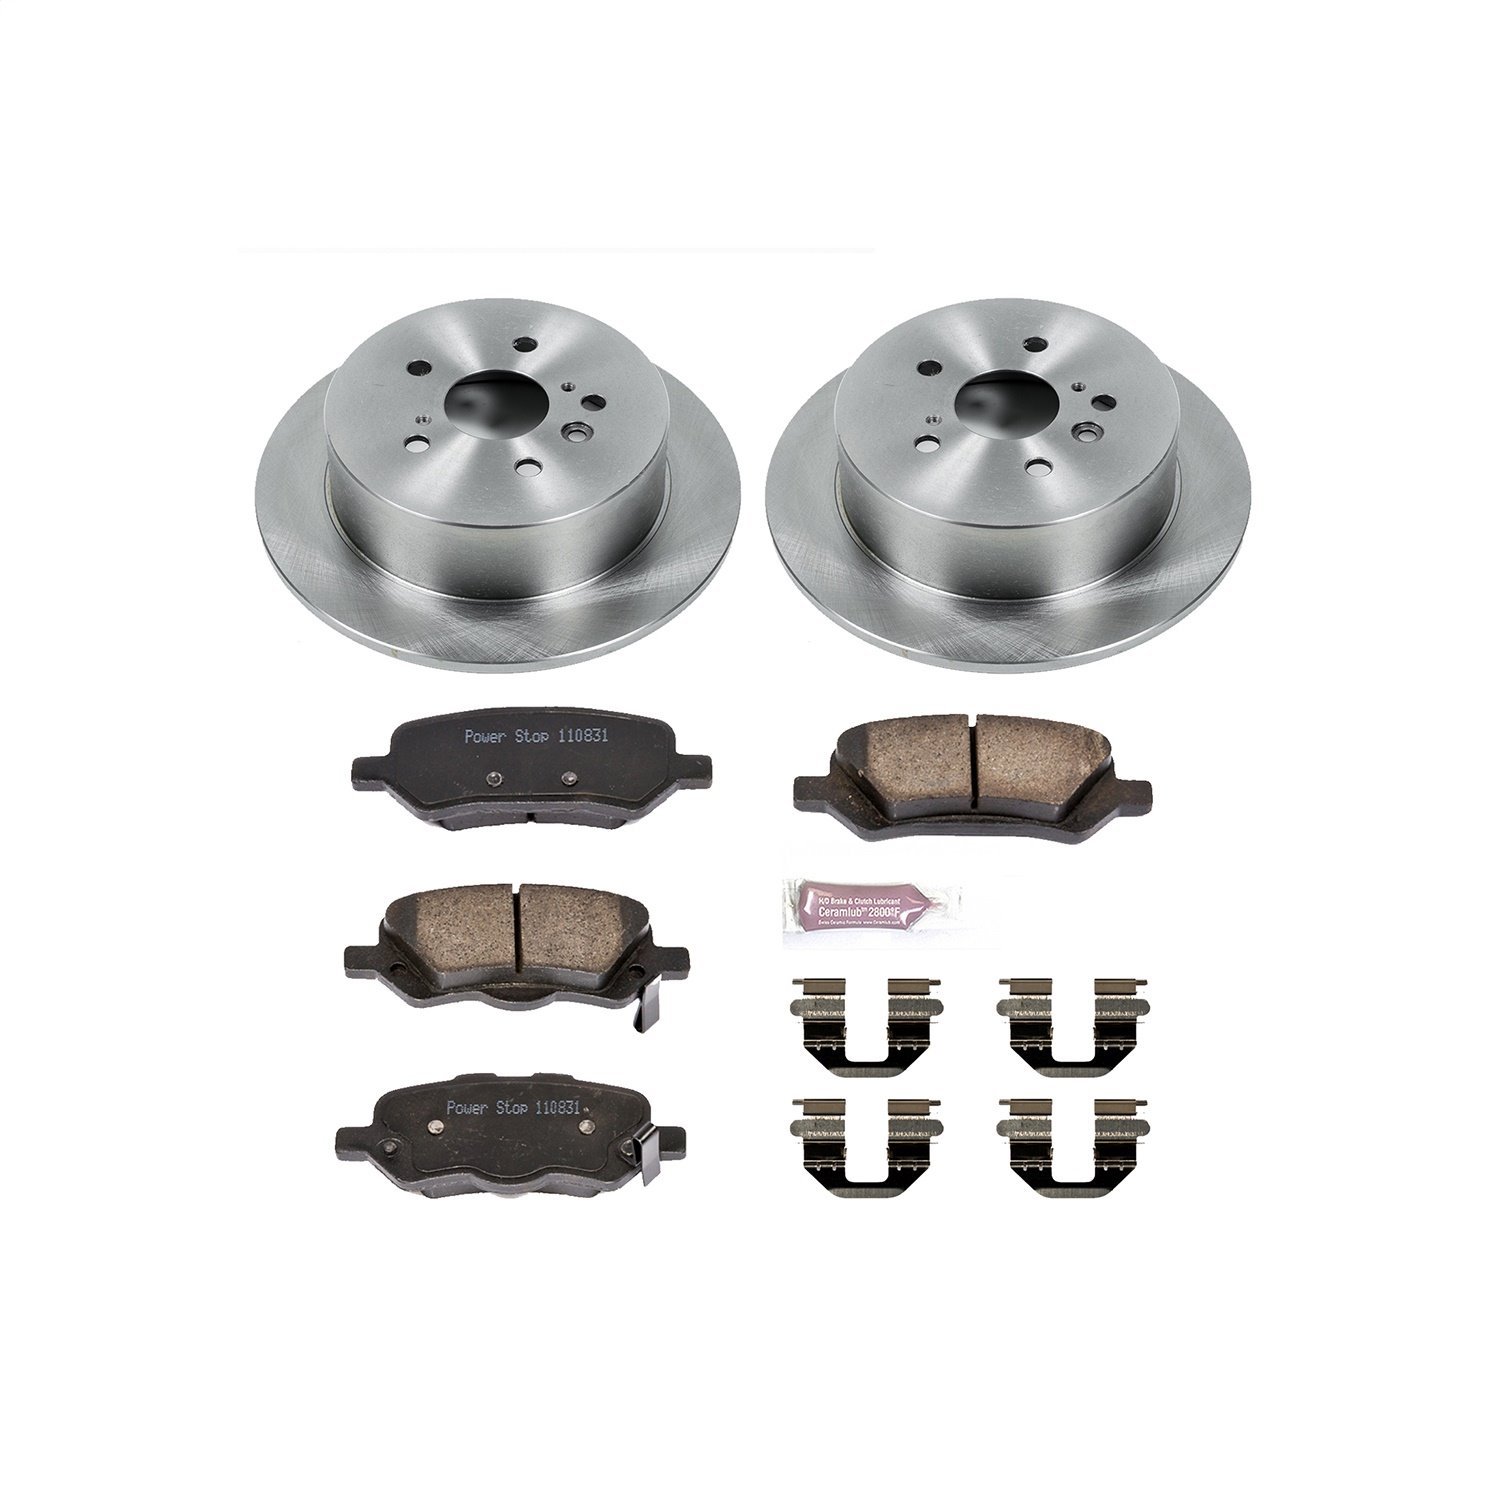 1-Click Daily Driver Brake Kits Rear OE Replacement Rotors Z16 Ceramic Scorched Brake Pads